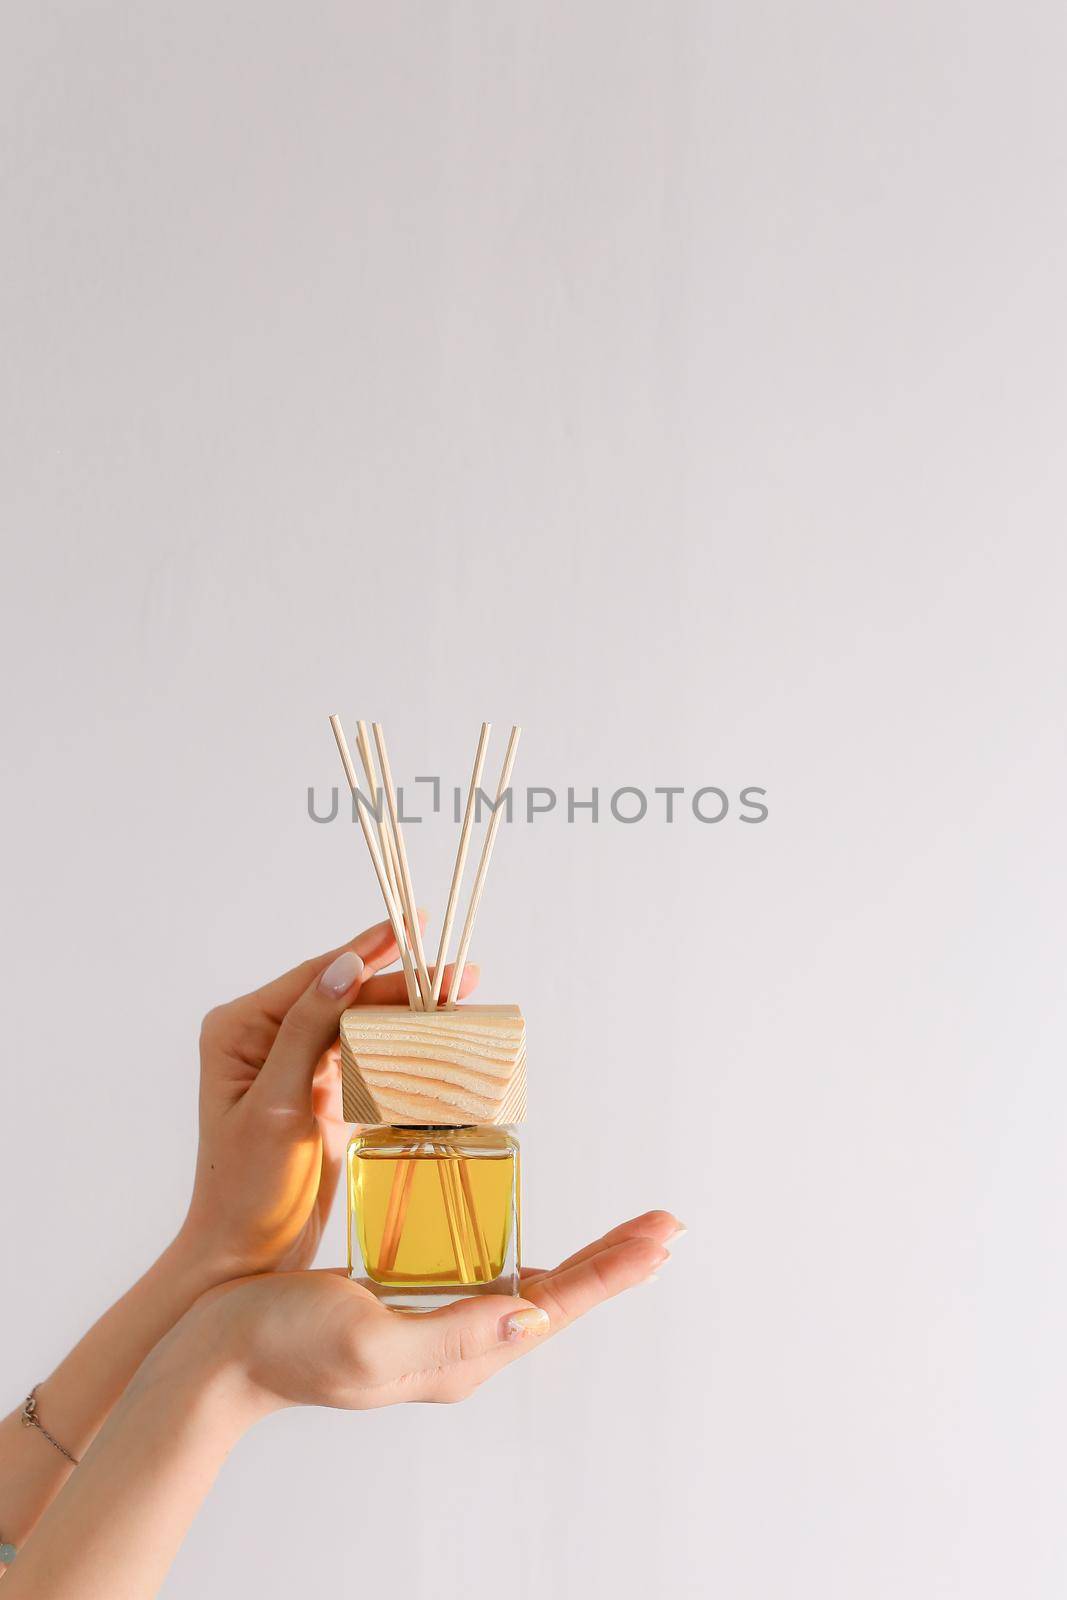 Aromatherapy reed diffuser air freshener on relaxed background with wooden sticks